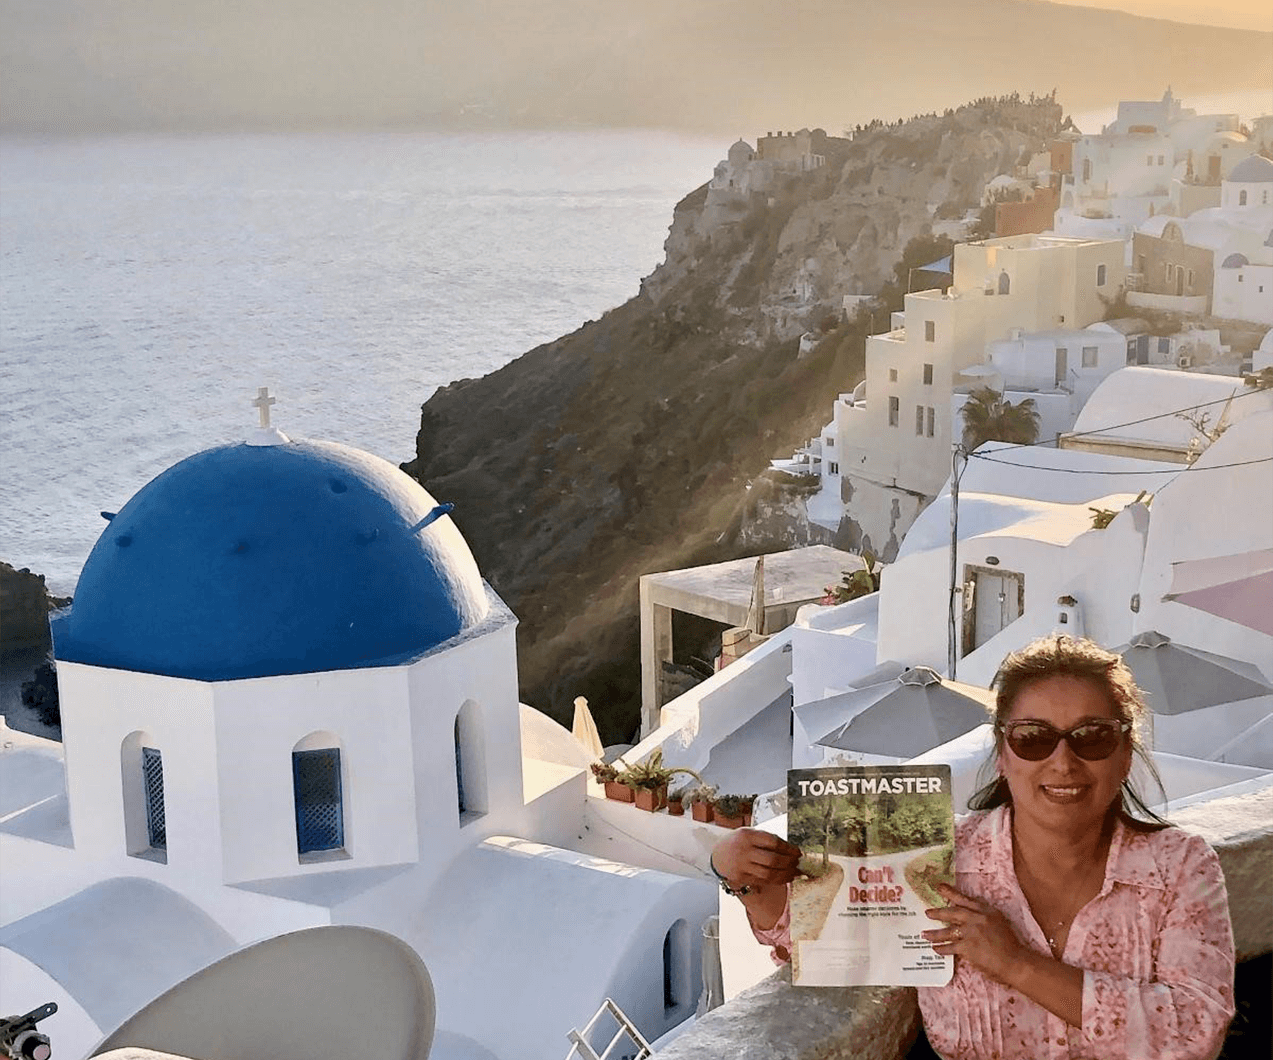 Laura Davis of National City, California, takes in the views of Santorini, Greece, one of the Cyclades islands in the Aegean Sea. 